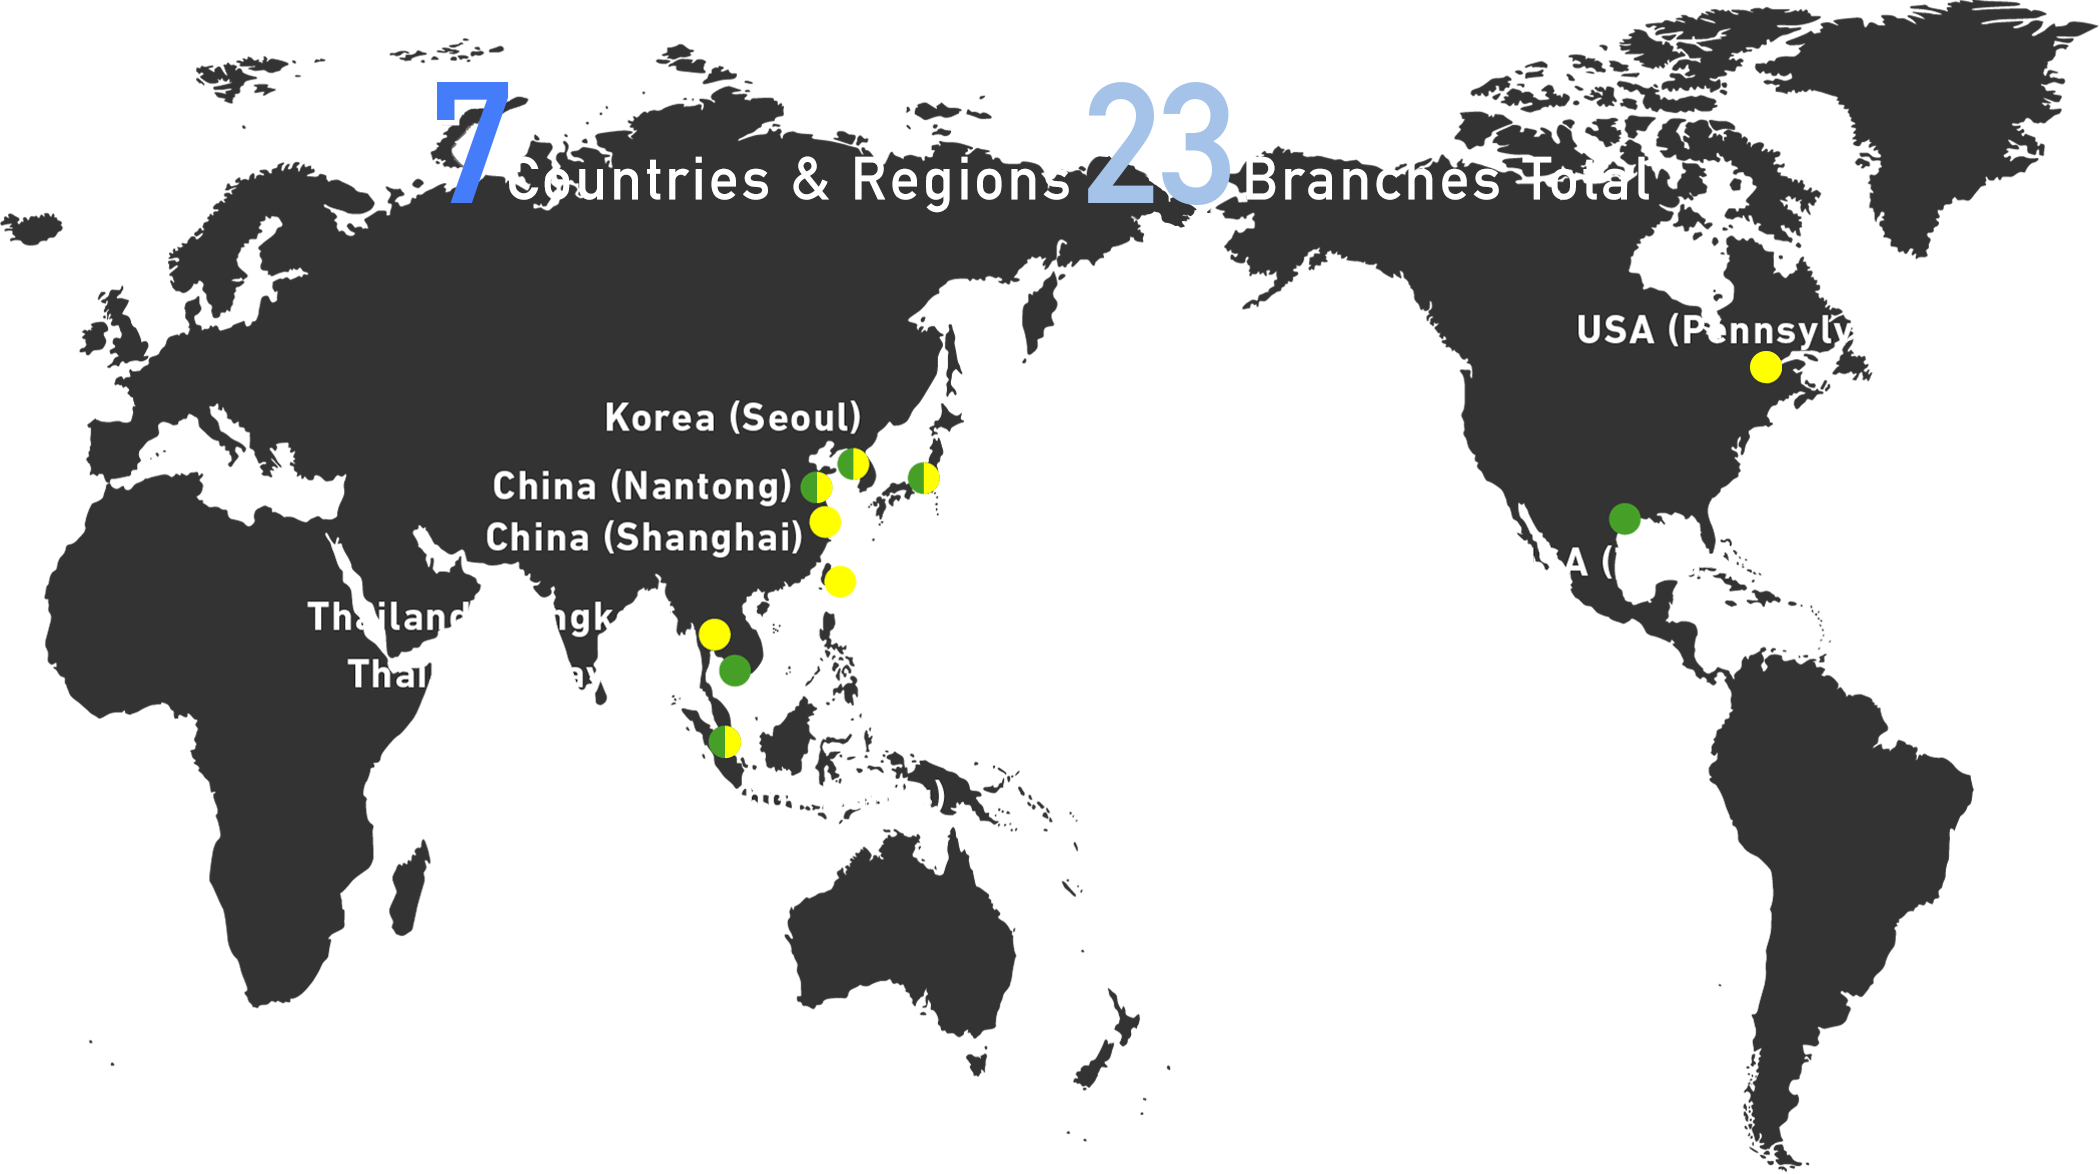 7Countries & Regions 23Branches Total